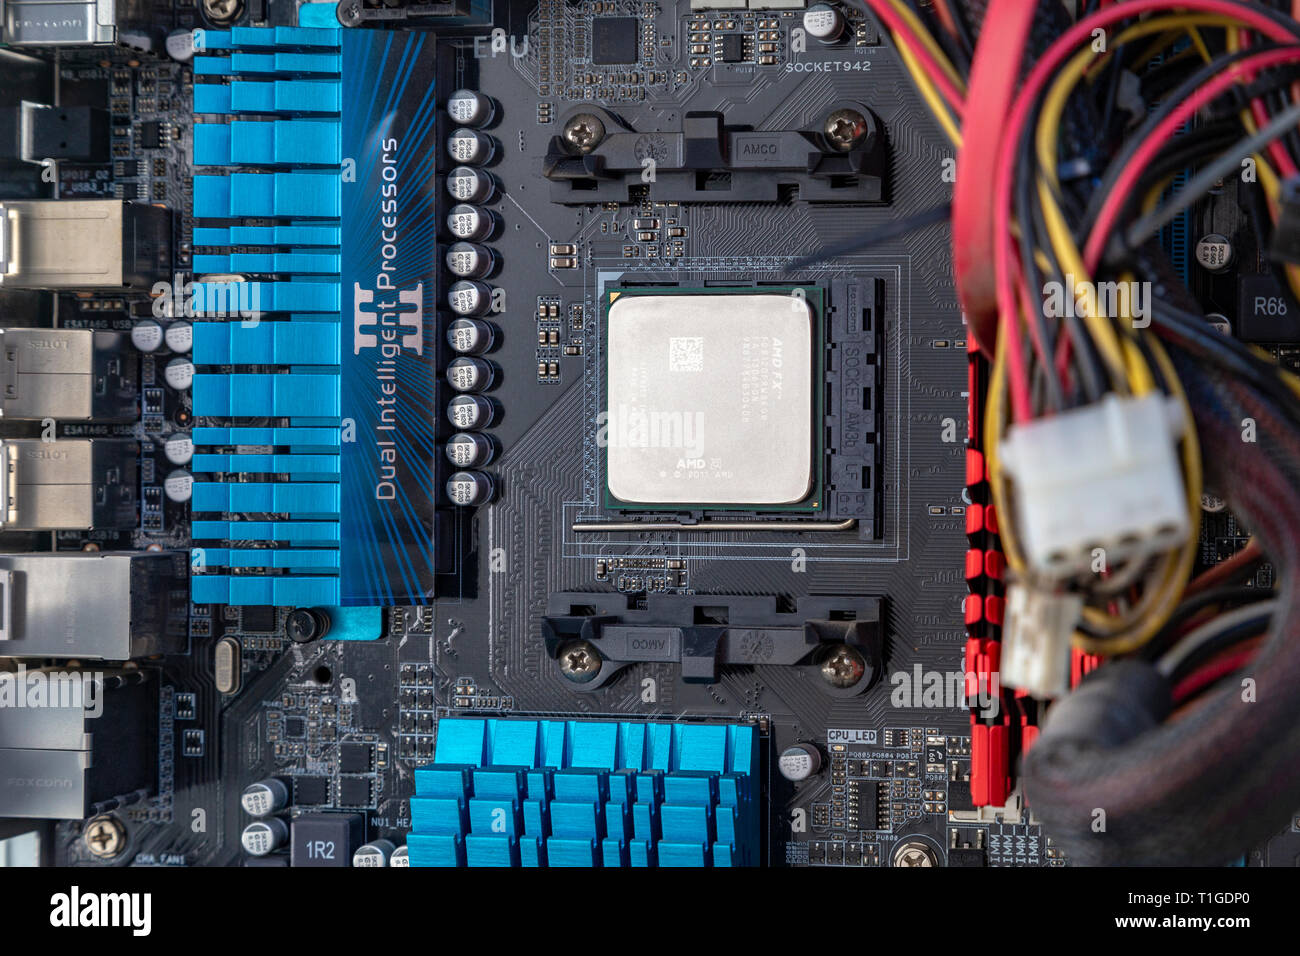 Motherboard Stock Photos & Motherboard Stock Images - Alamy